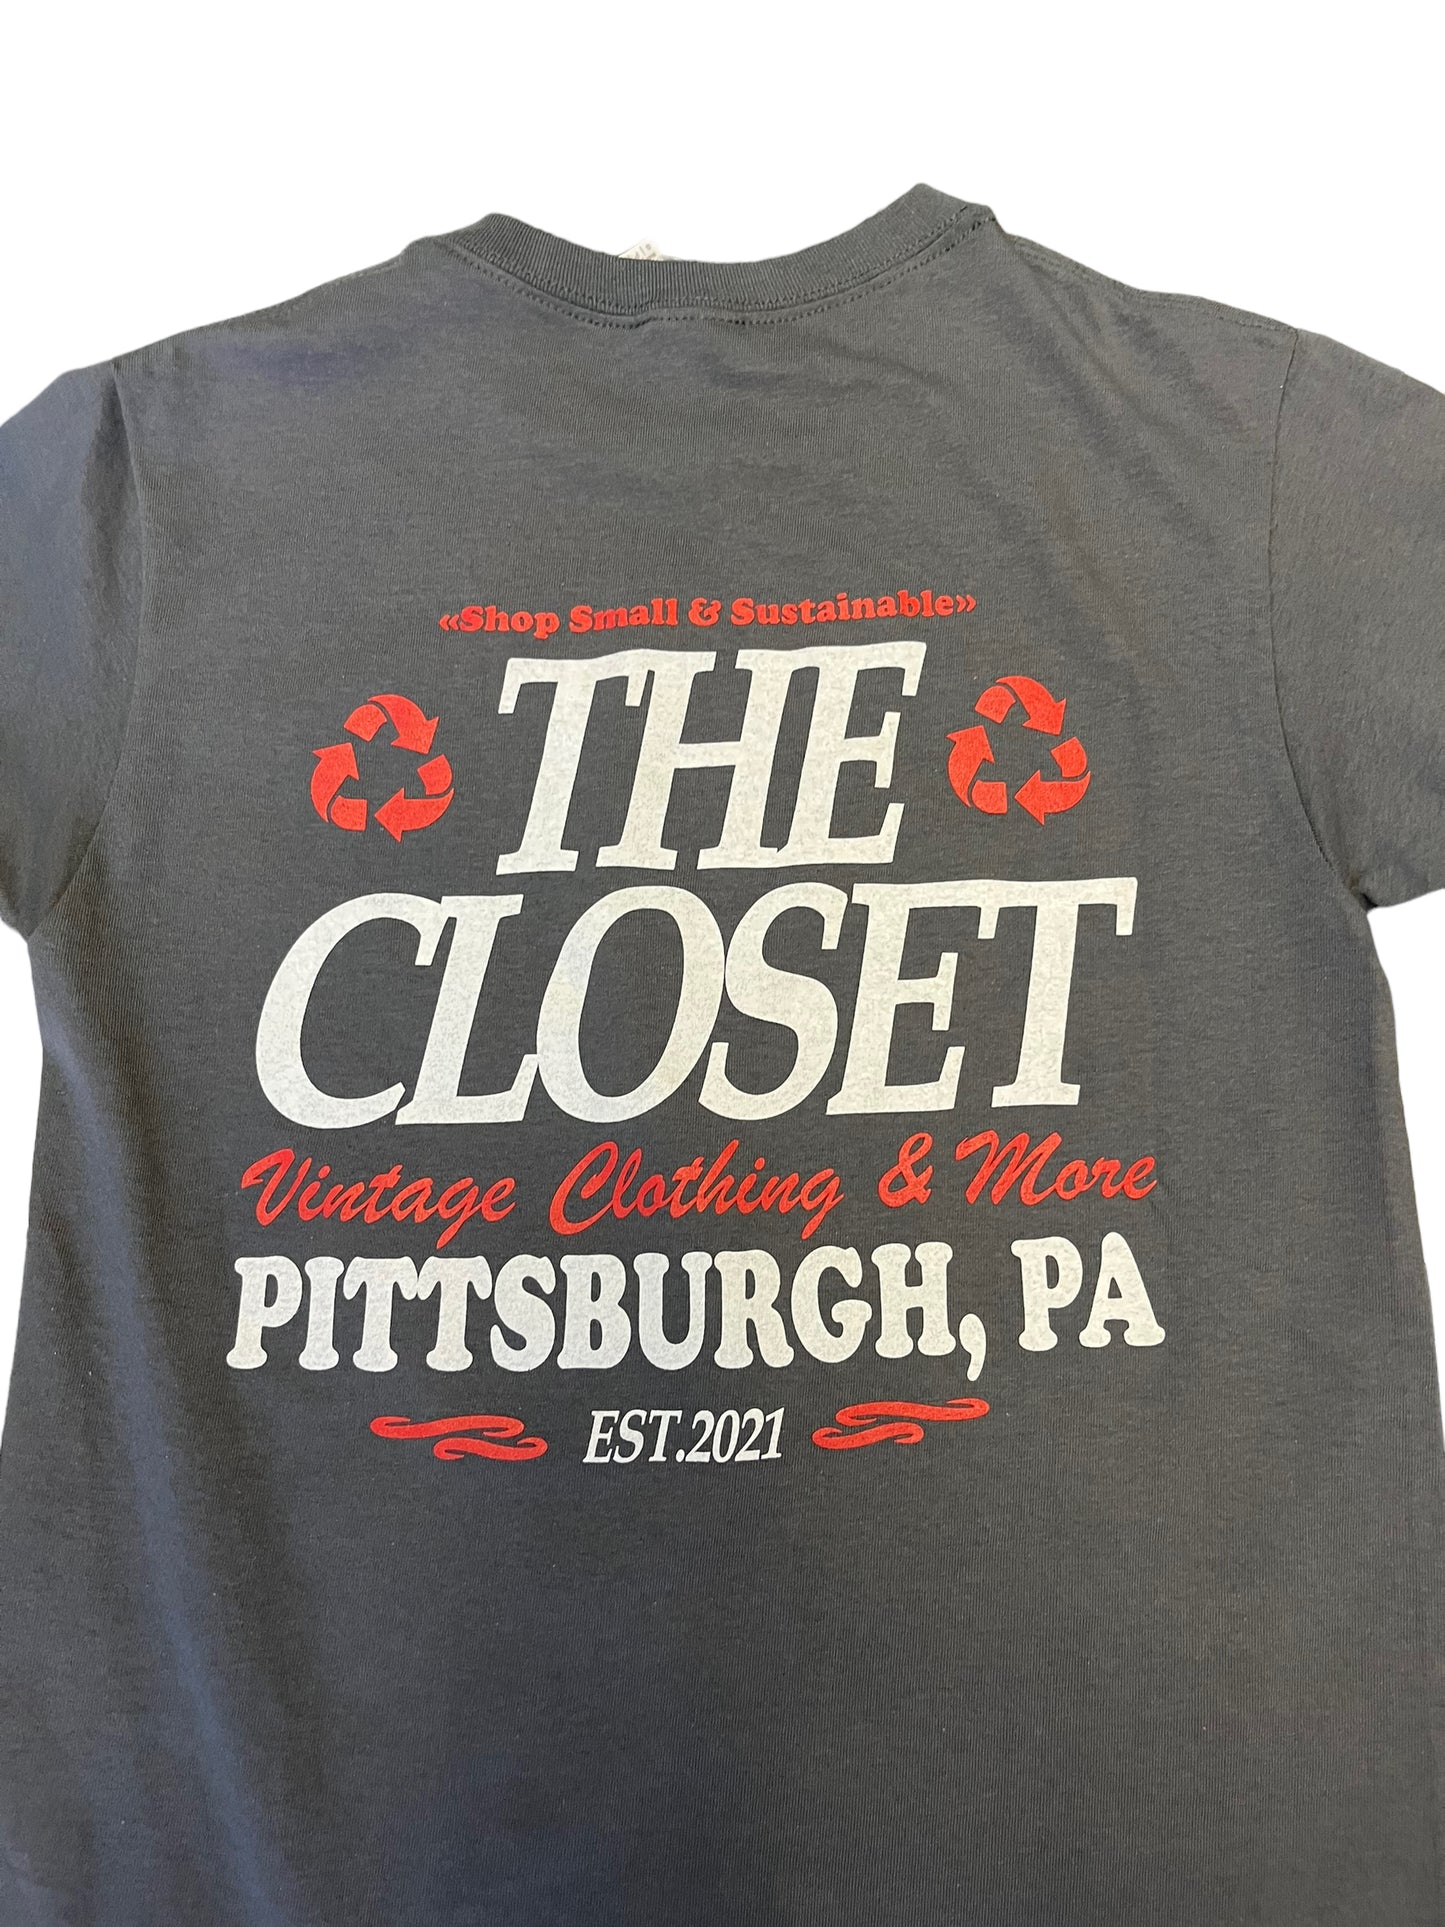 (S) The Closet PGH Double Sided Store Tees